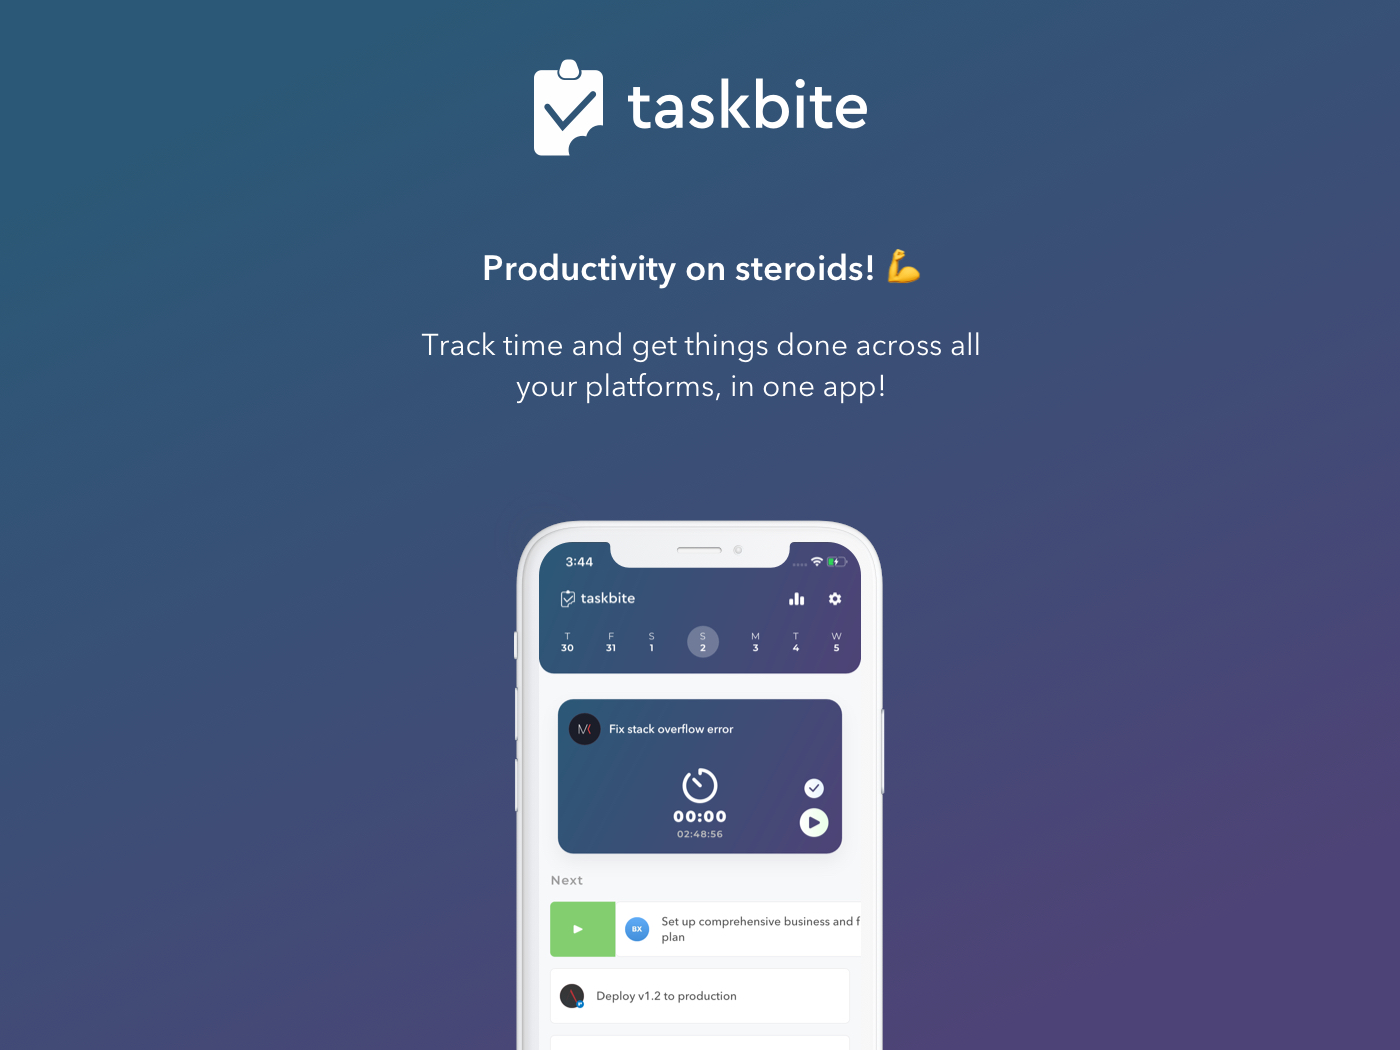 Get feedback from a vast remote working audience about TaskBite